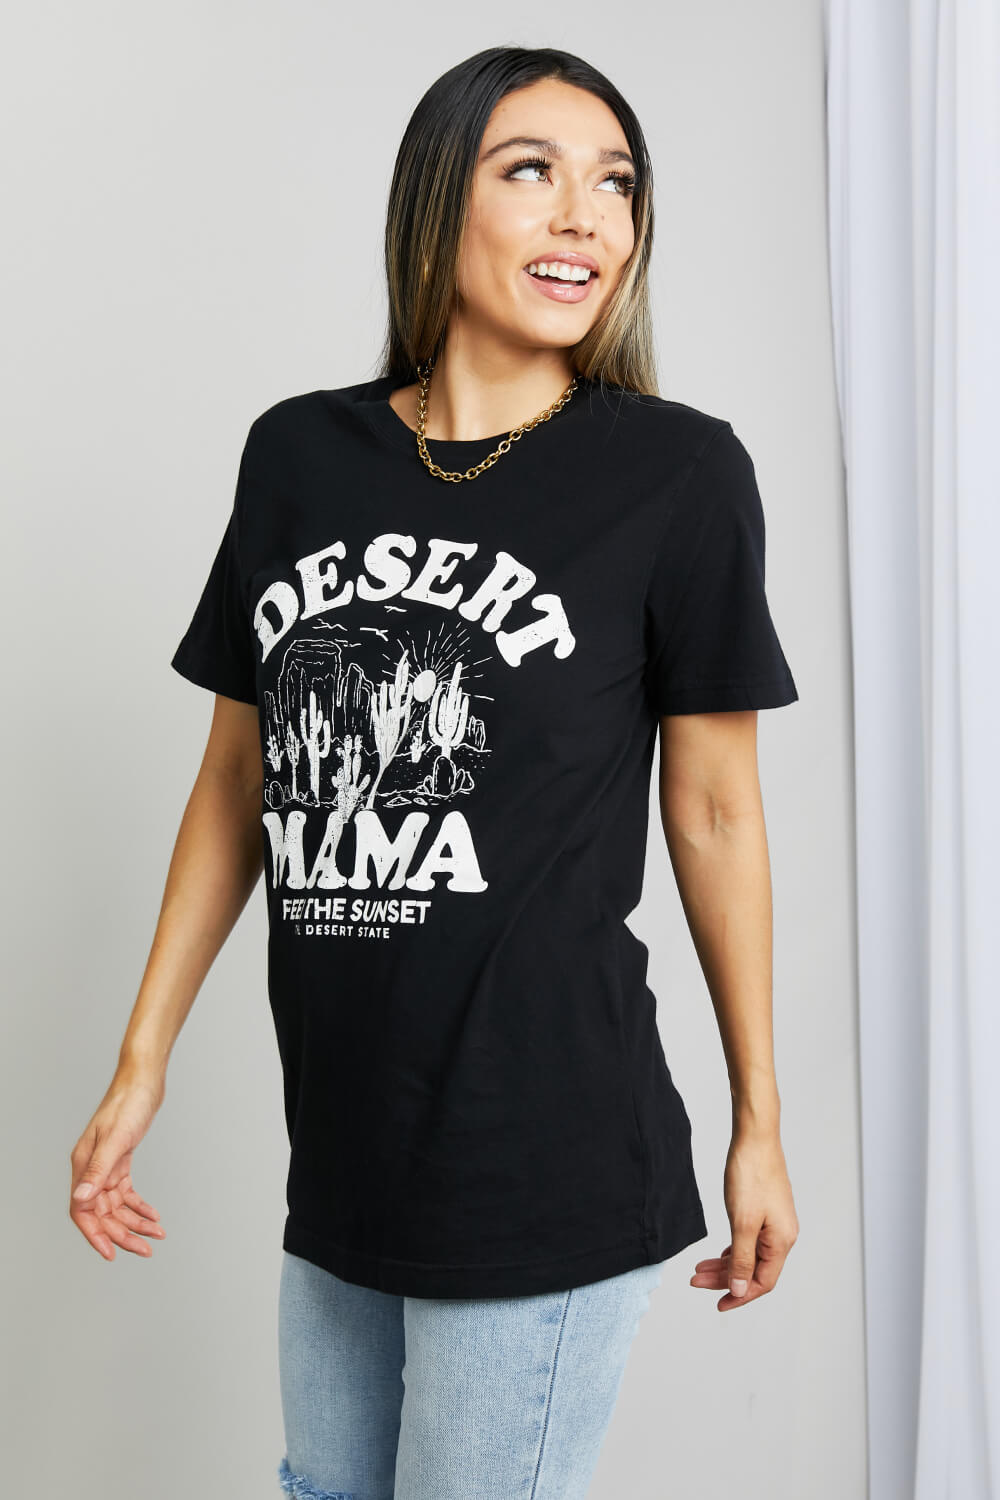 Woman modeling graphic print black tee with graphic tee with white ink - "Desert Mama - Feel the sunset the desert state"